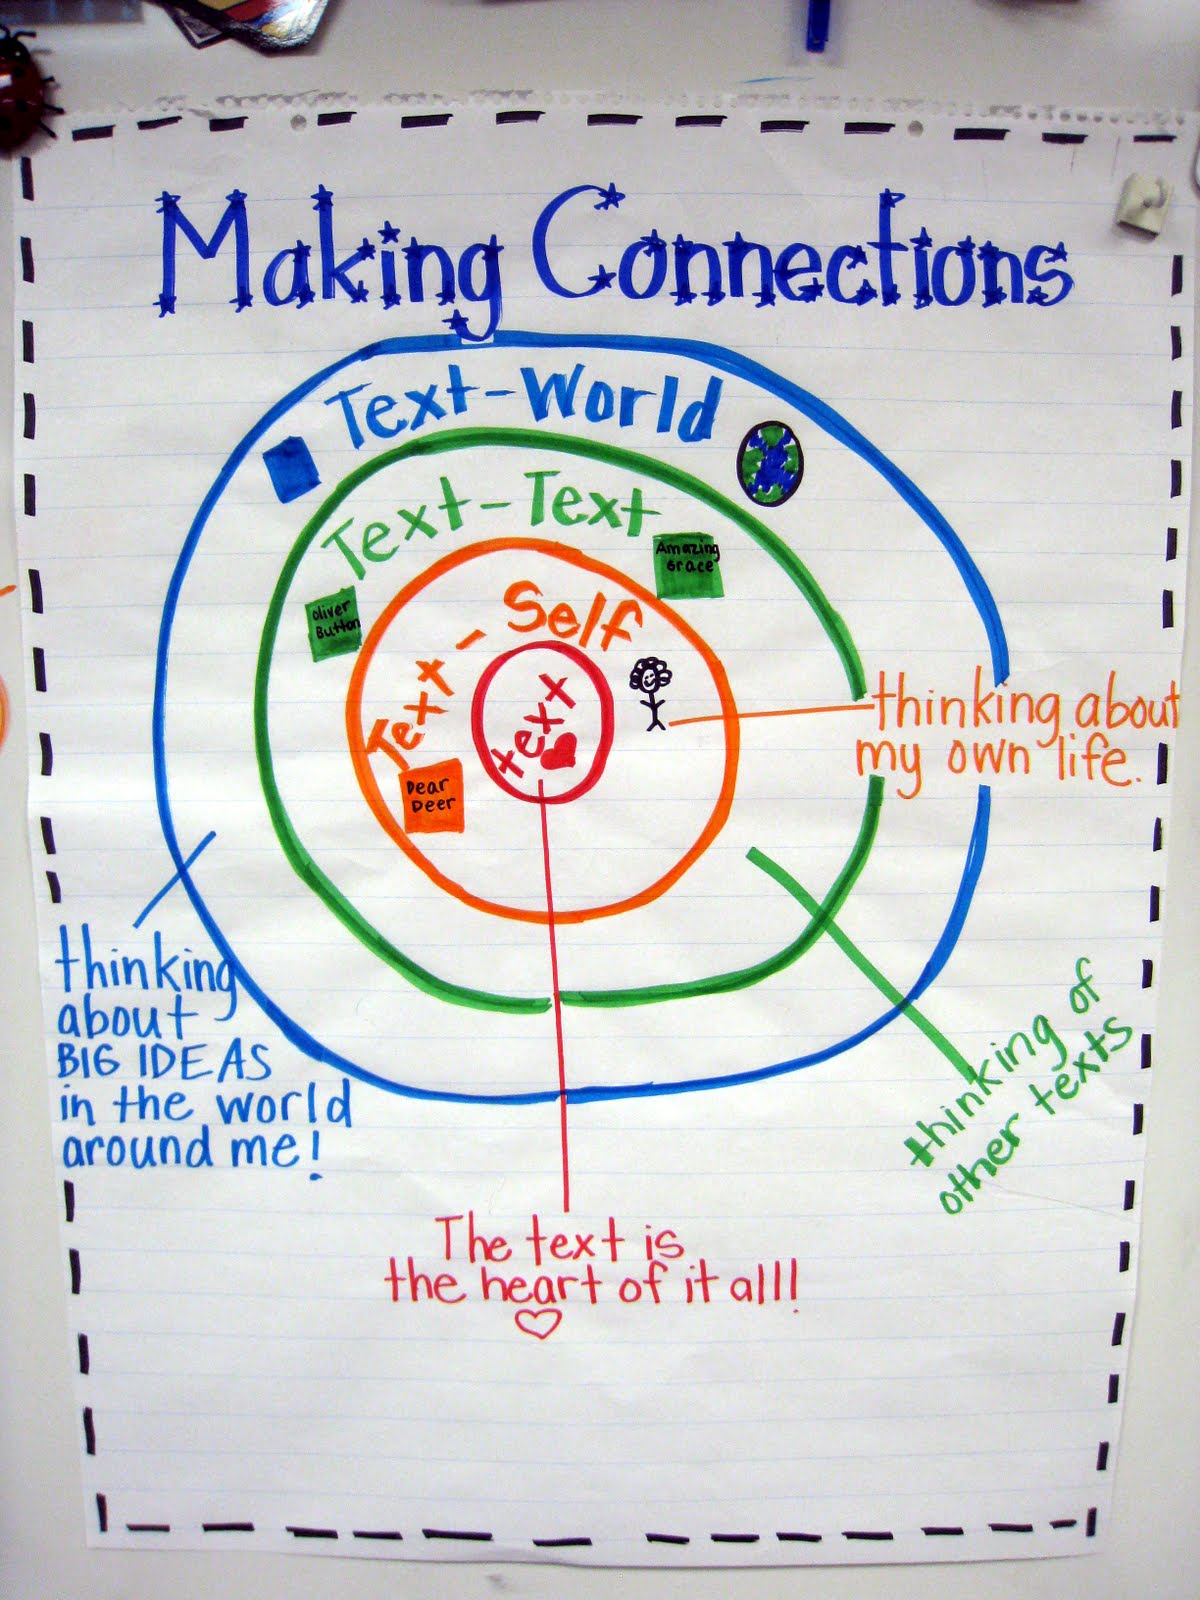 Read and connect. Making connections. Make connections. Making a connection.